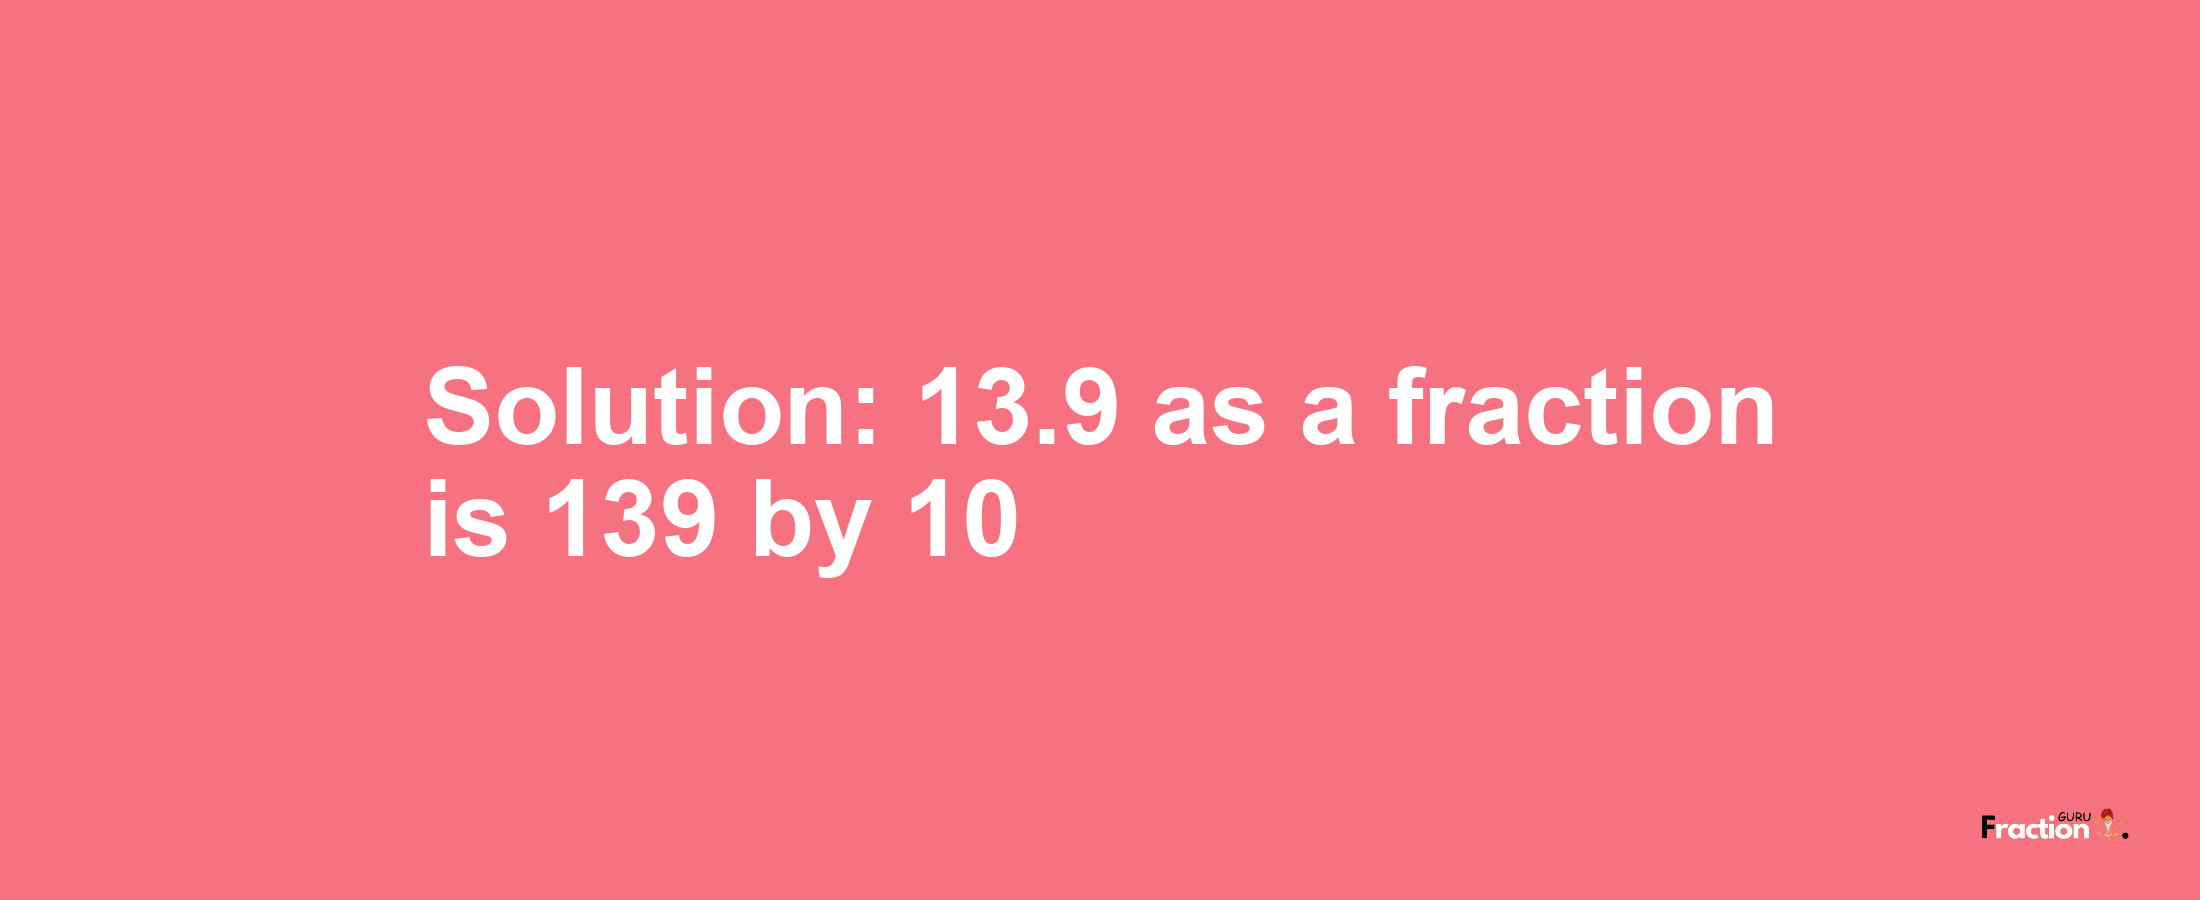 Solution:13.9 as a fraction is 139/10